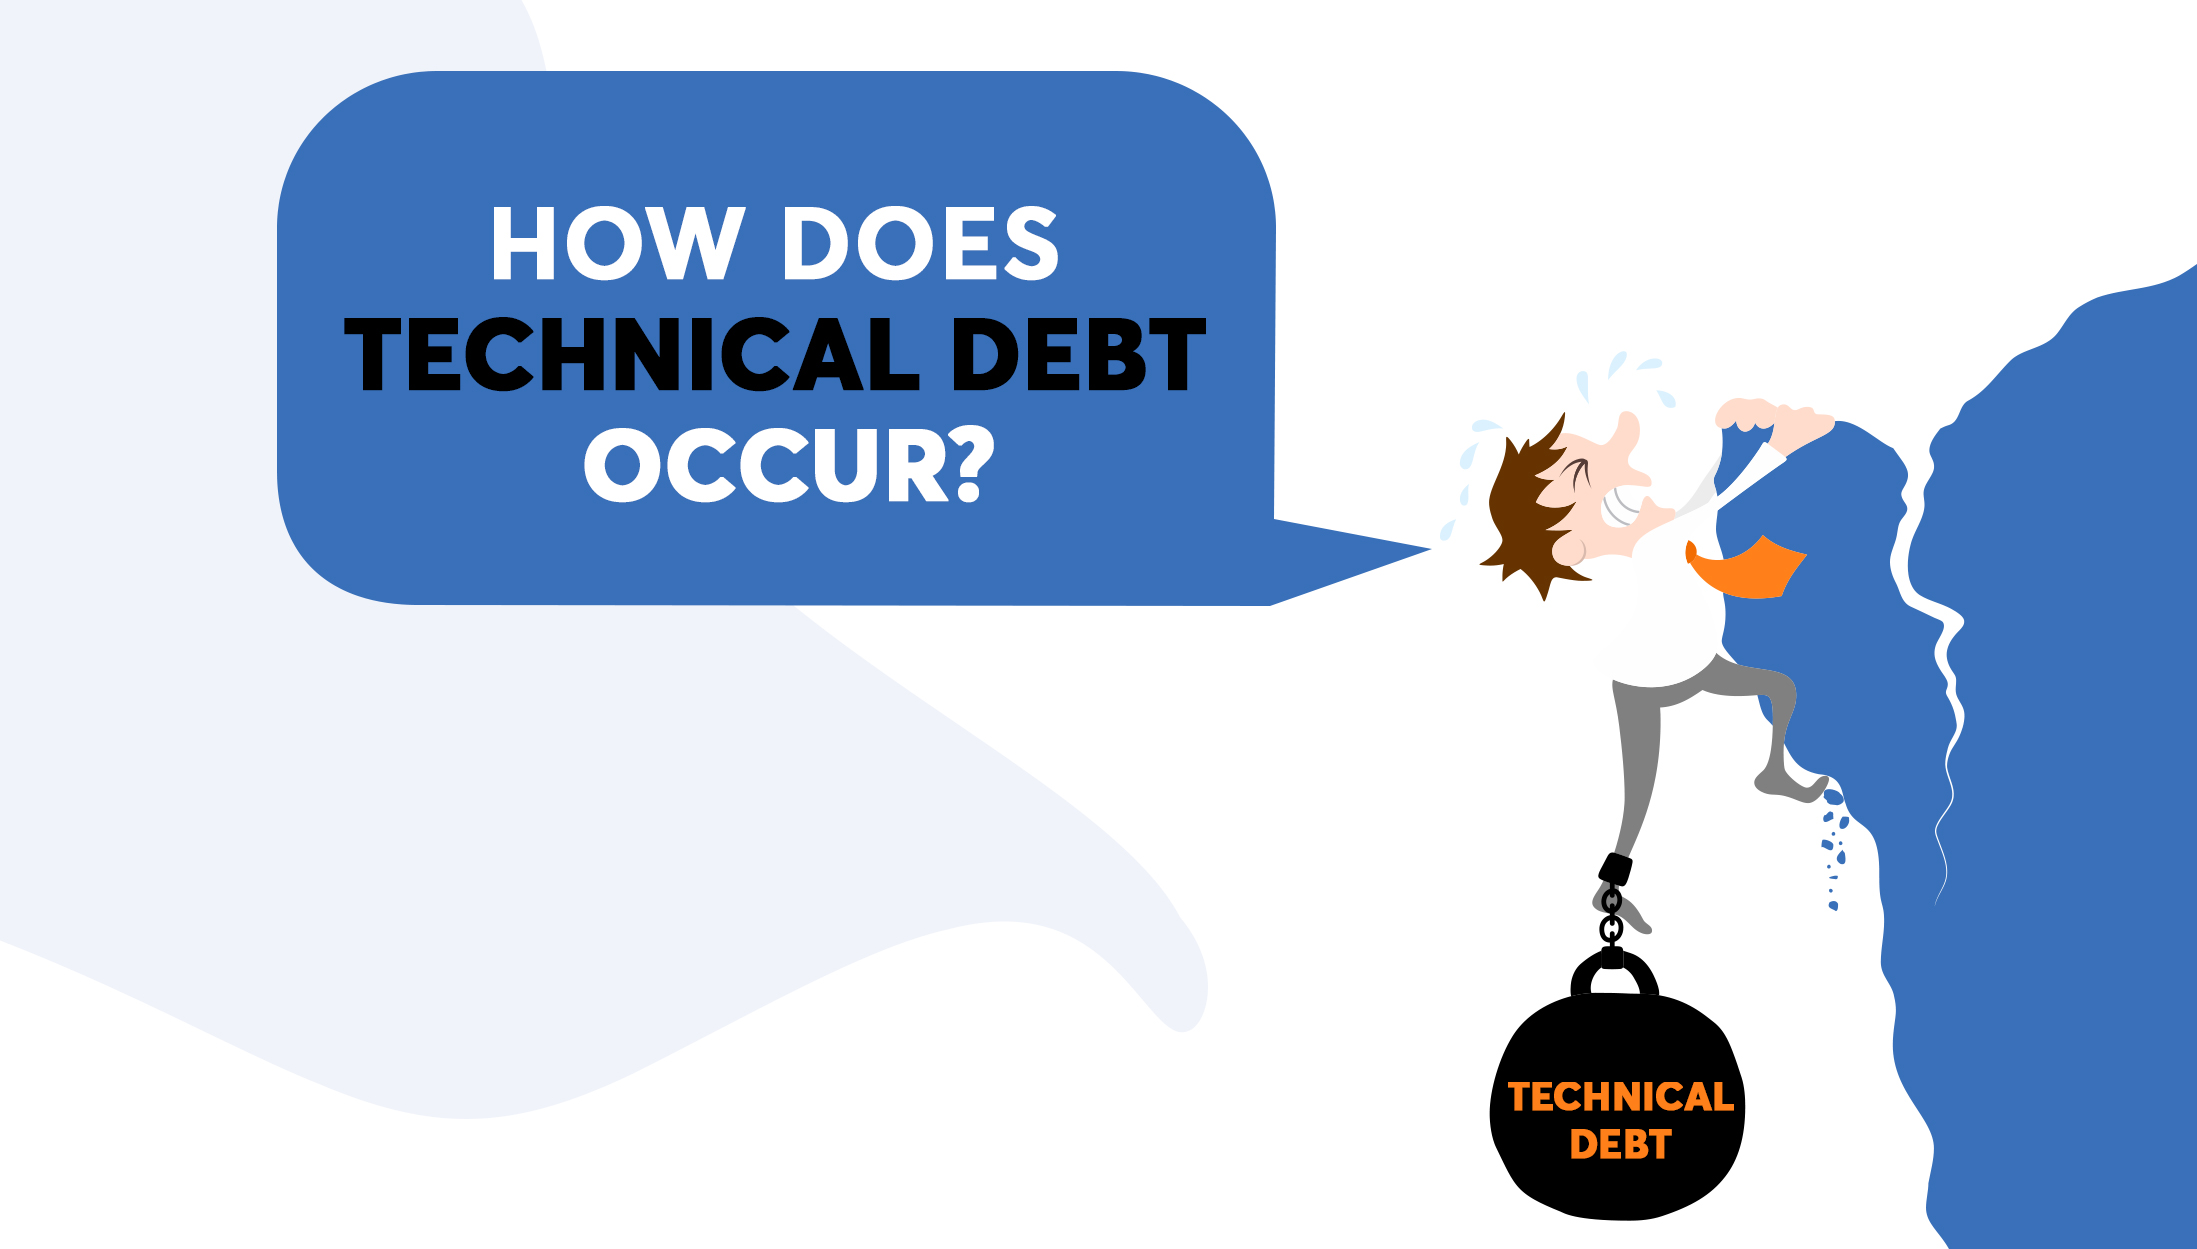 How does Technical debt occur